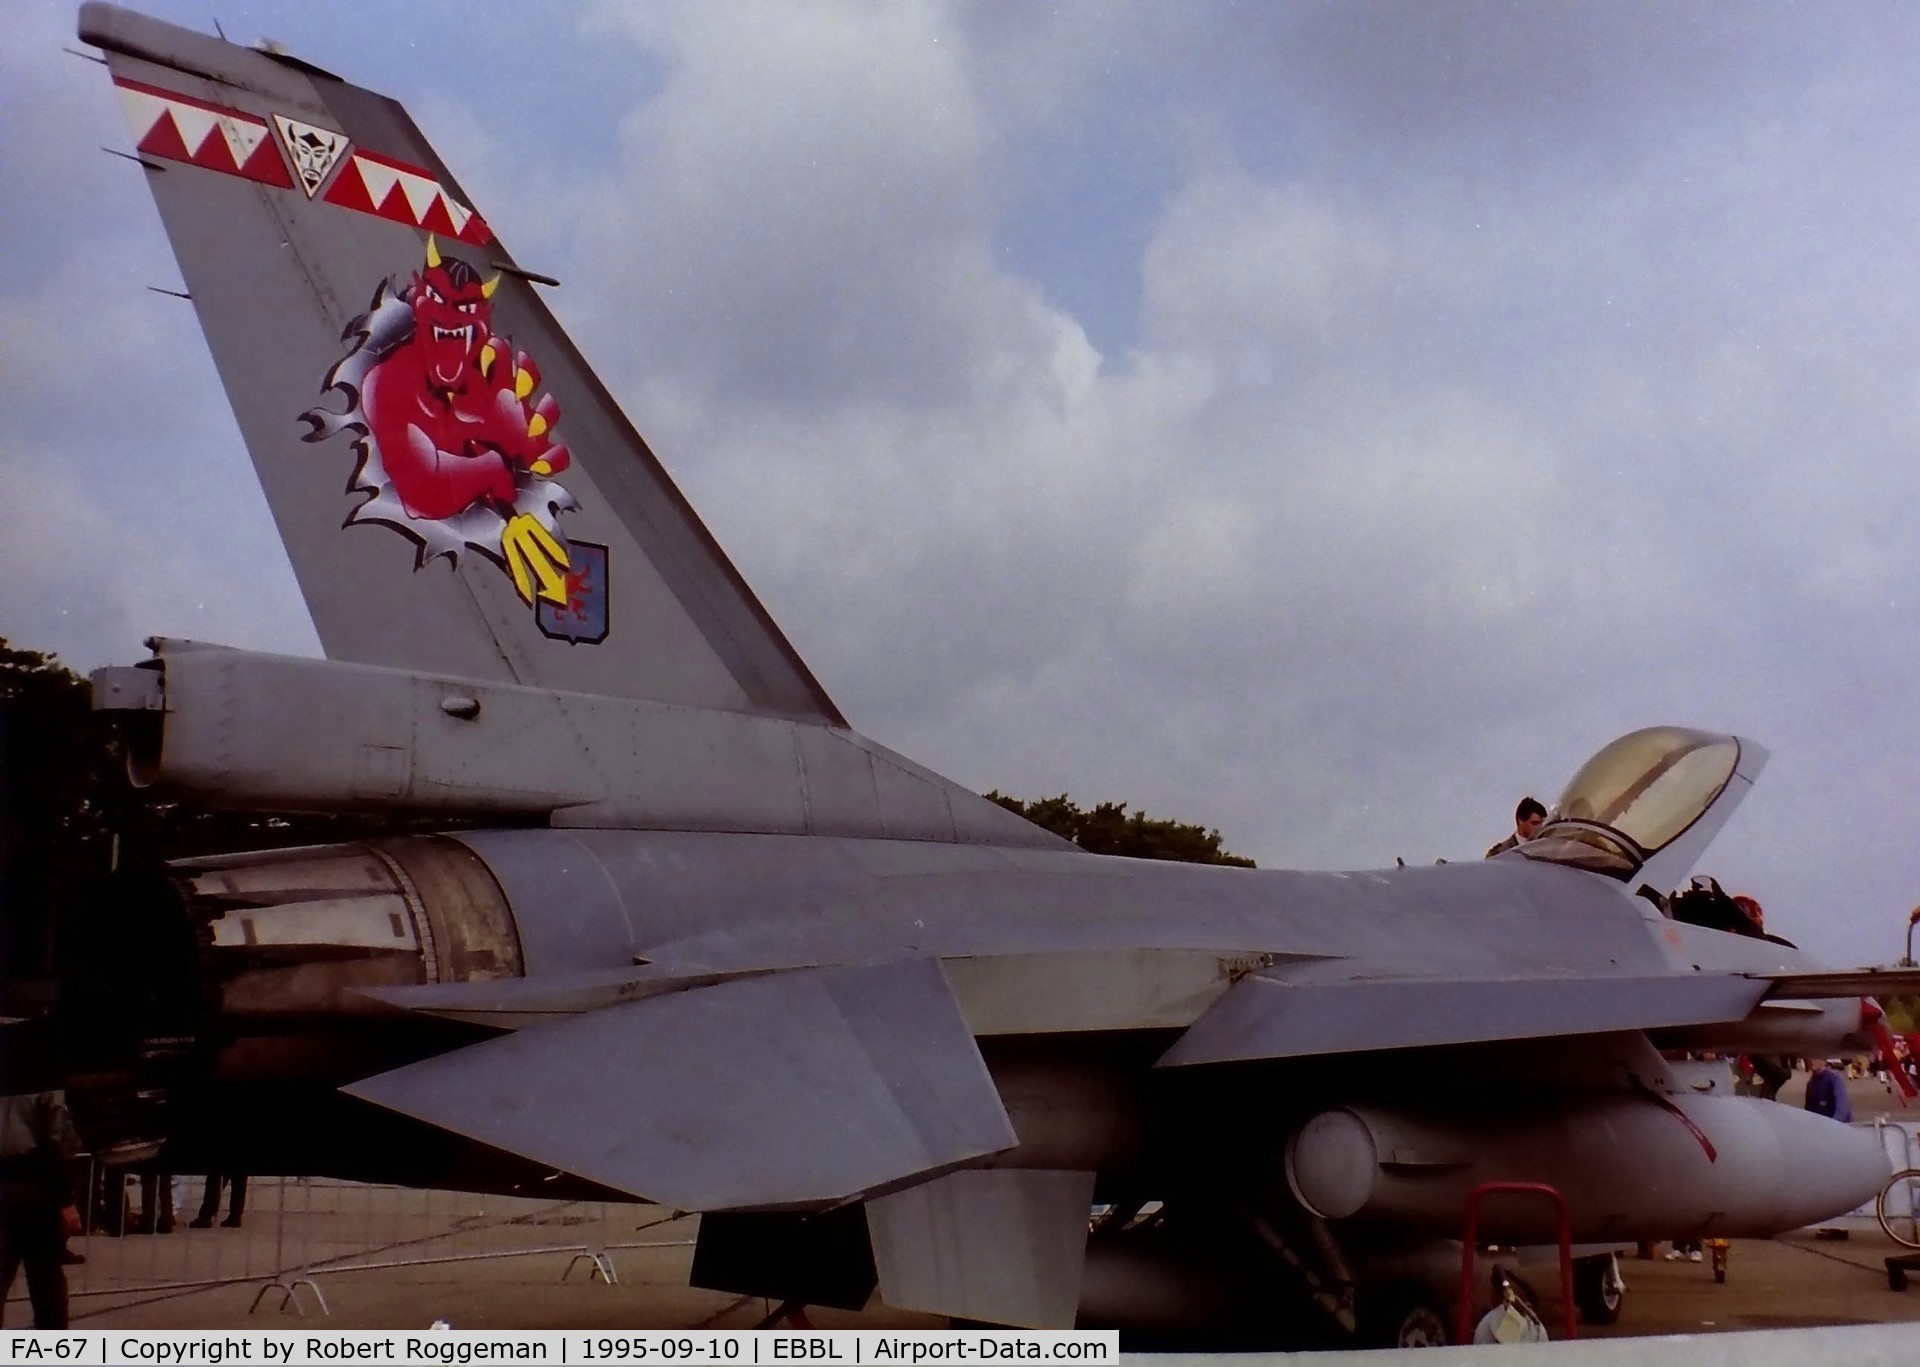 FA-67, 1980 SABCA F-16AM Fighting Falcon C/N 6H-67, F-16A.SPECIAL PAINT 23 SQN.